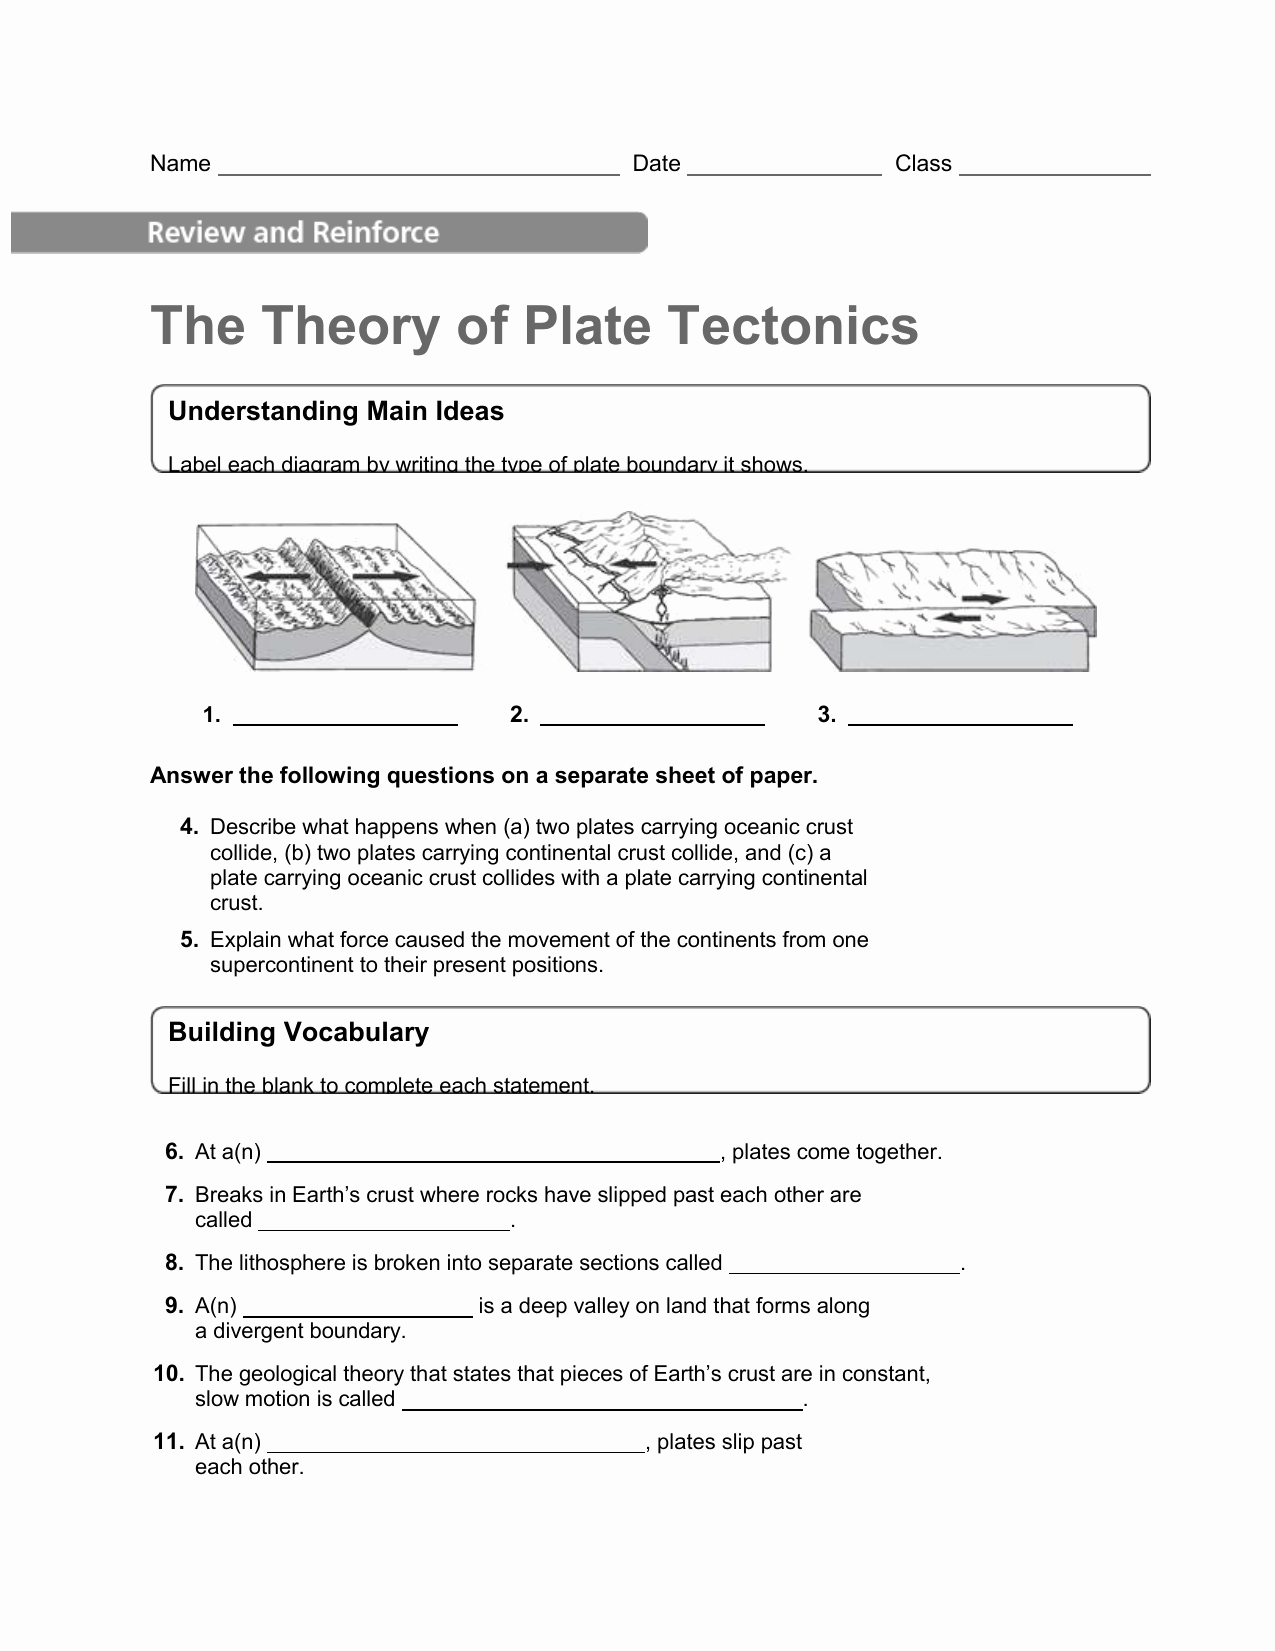 Plate Tectonics Worksheet Answers Lovely the theory Plate Tectonics Worksheet Answers Key